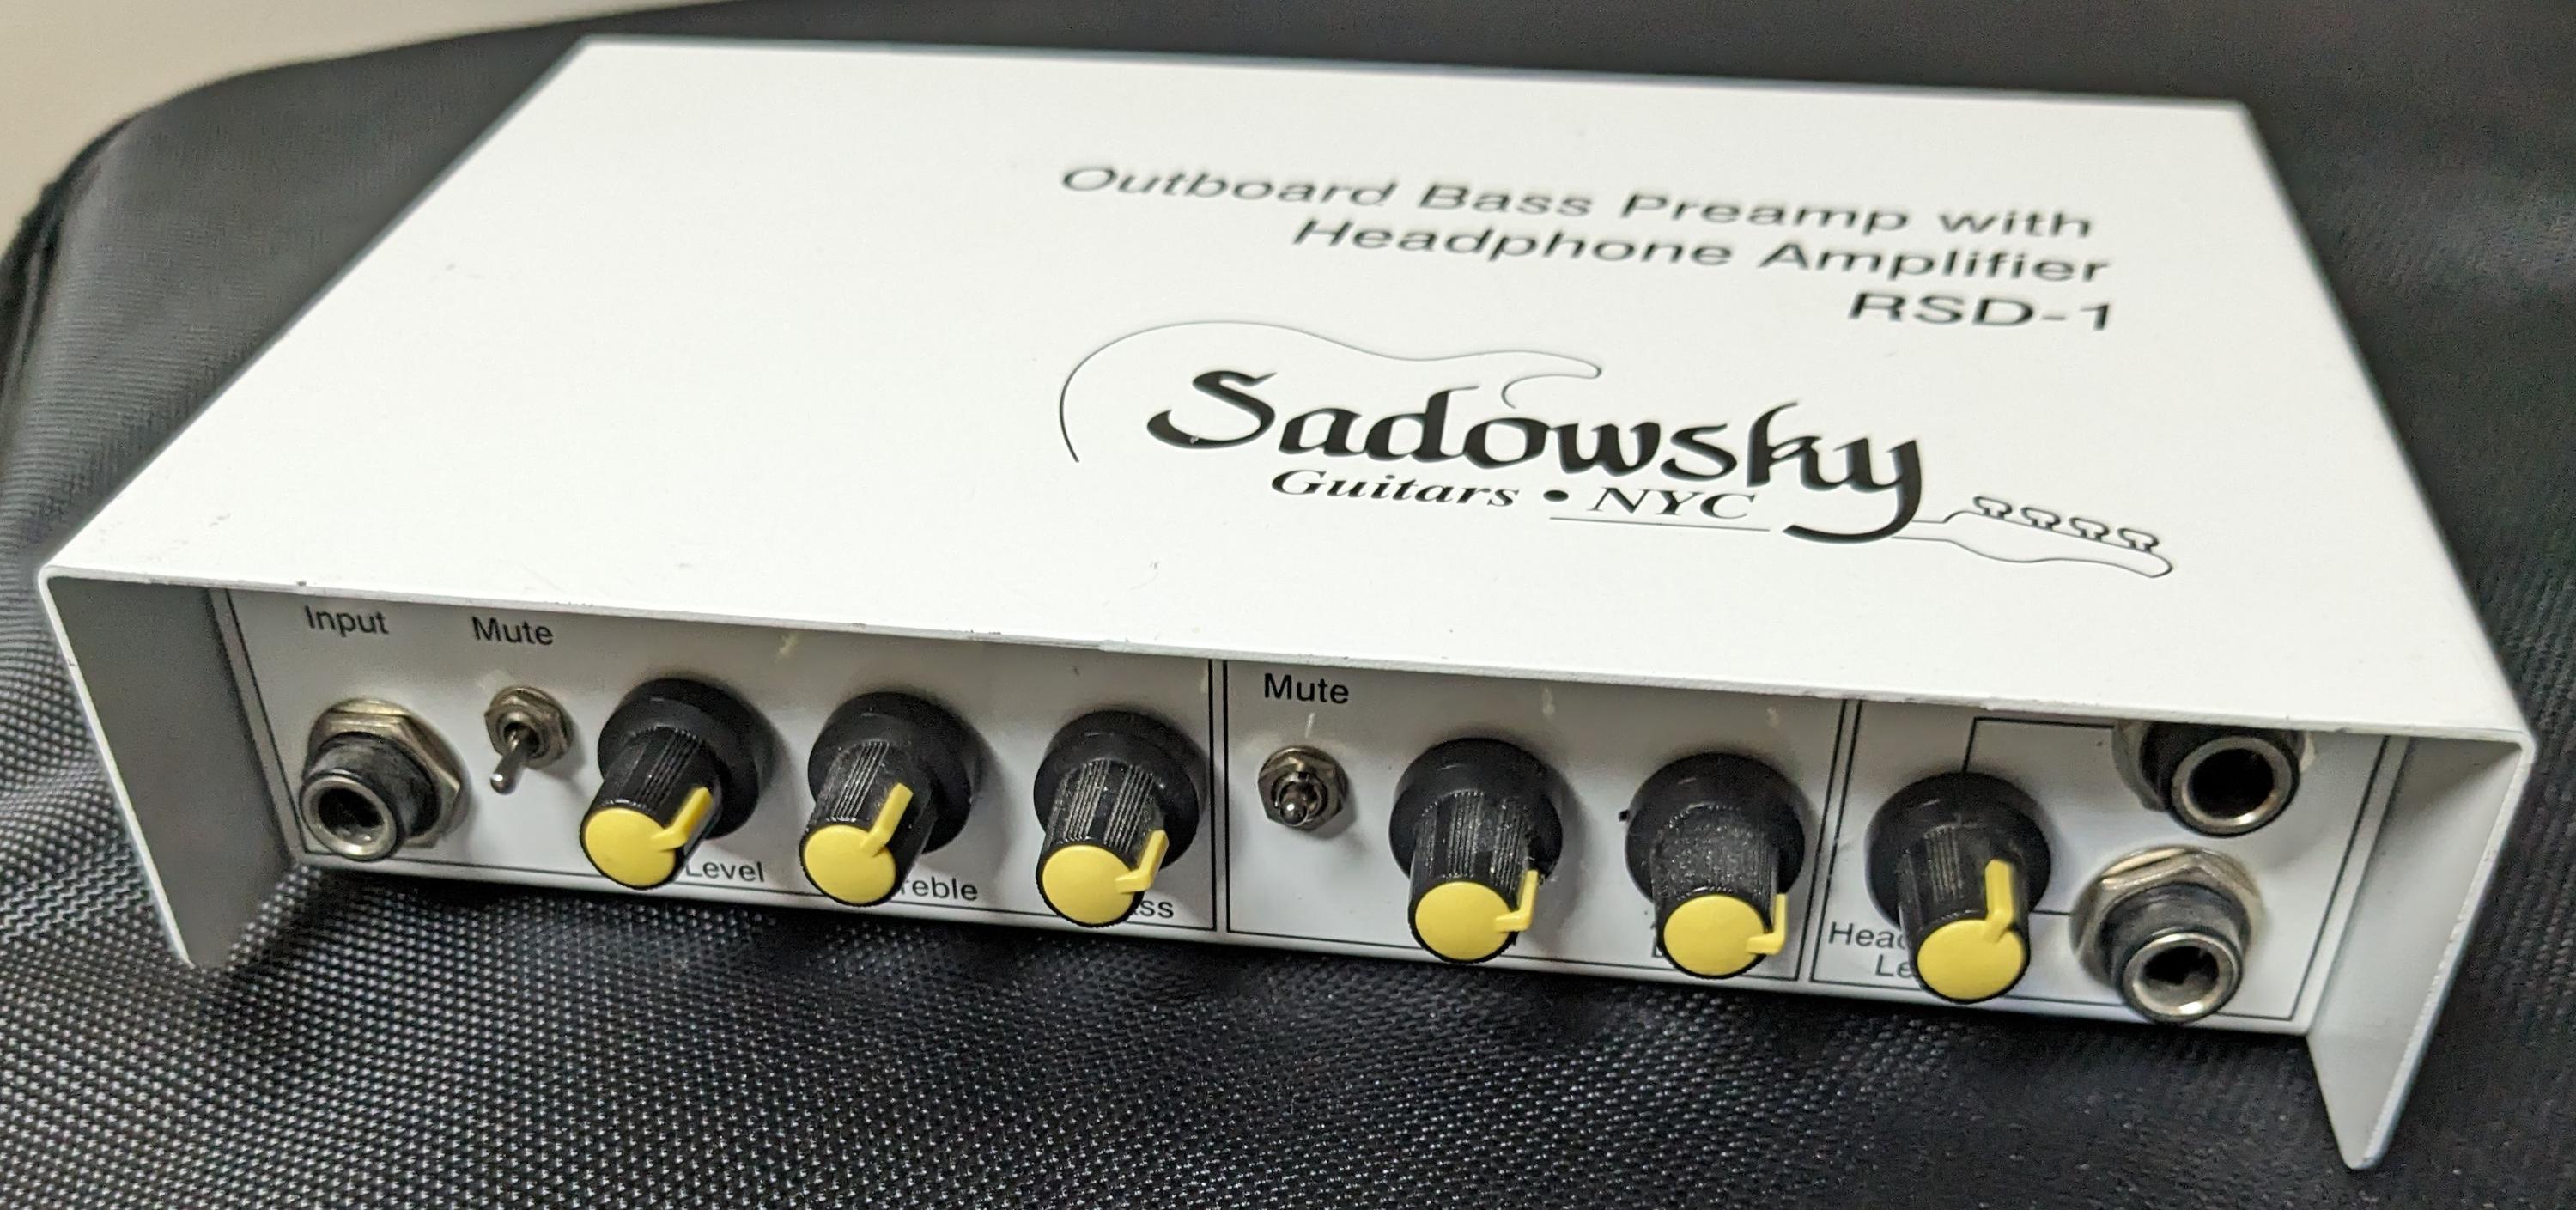 Used Sadowsky RSD-1 - Outboard Bass Preamp with Headphone Amplifier - Used